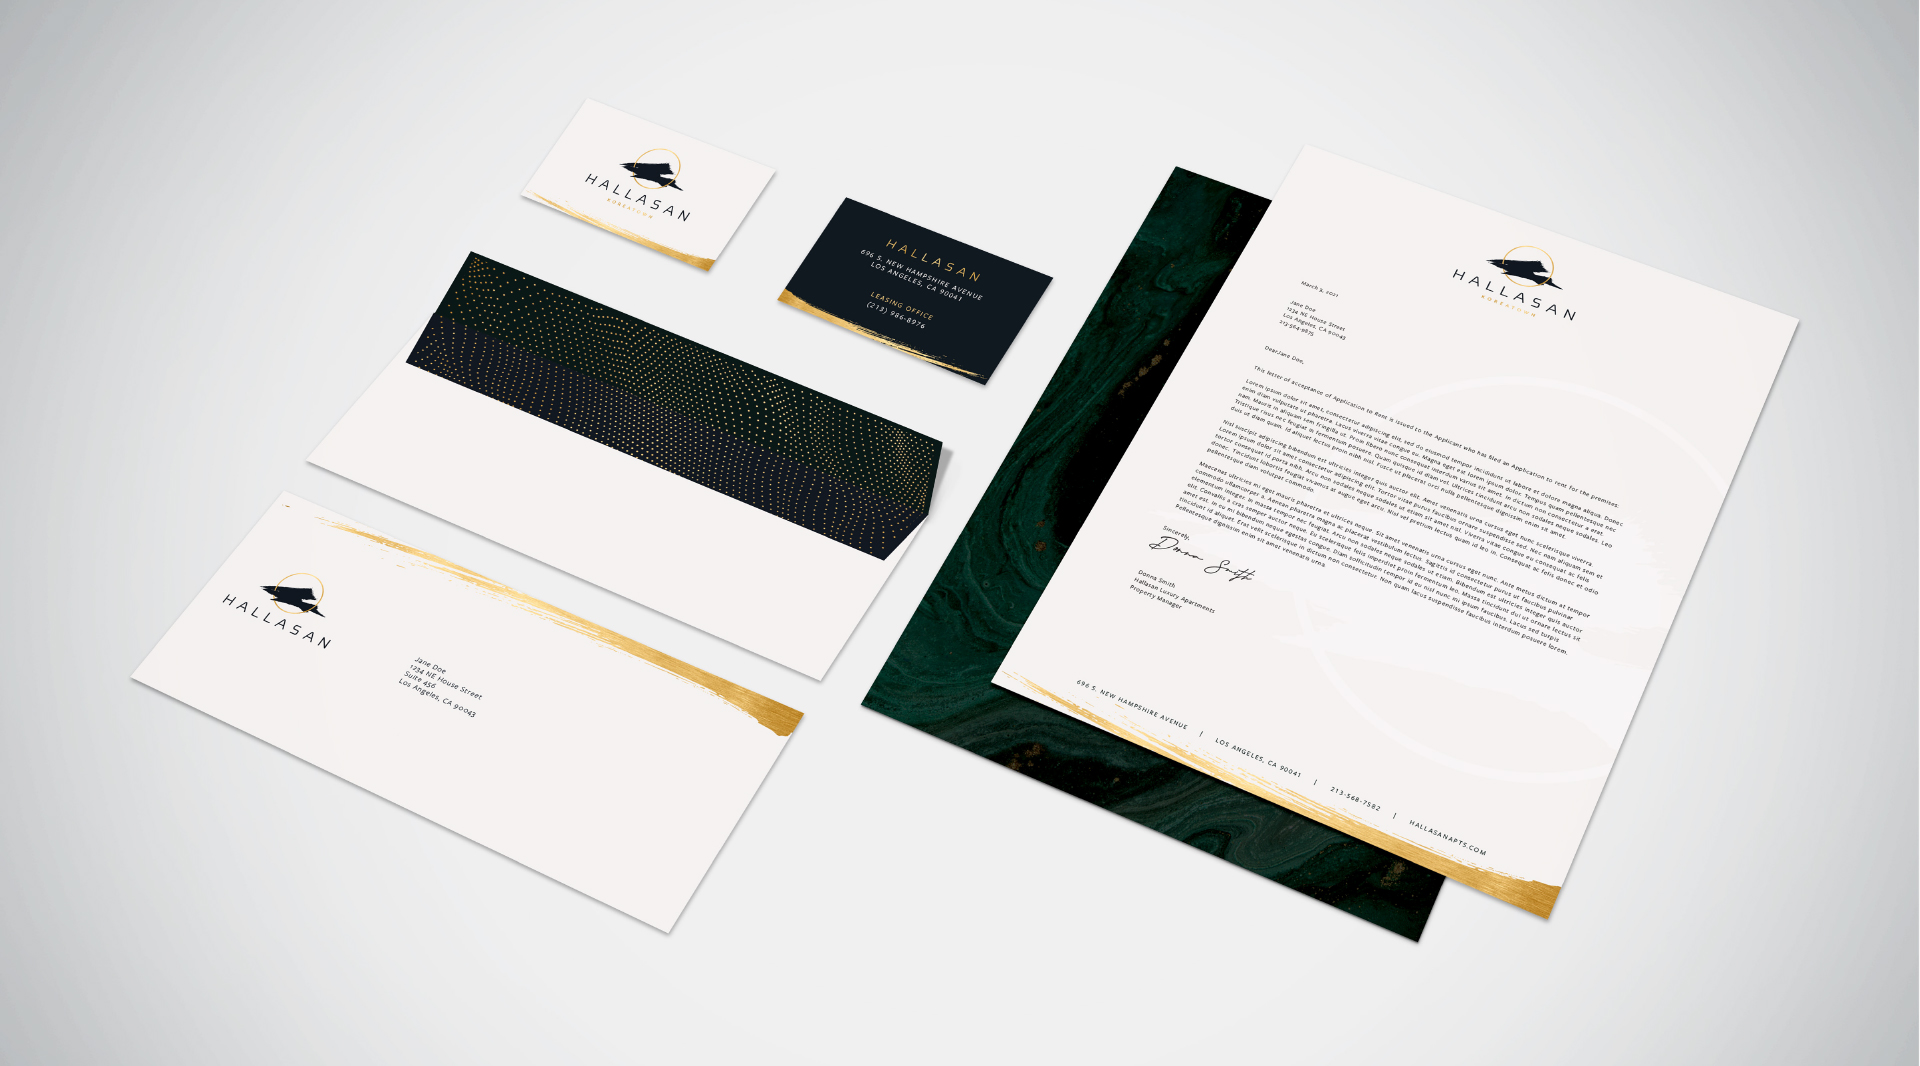 Branding materials created for Hallasan Luxury Apartments brand by Incubate Design